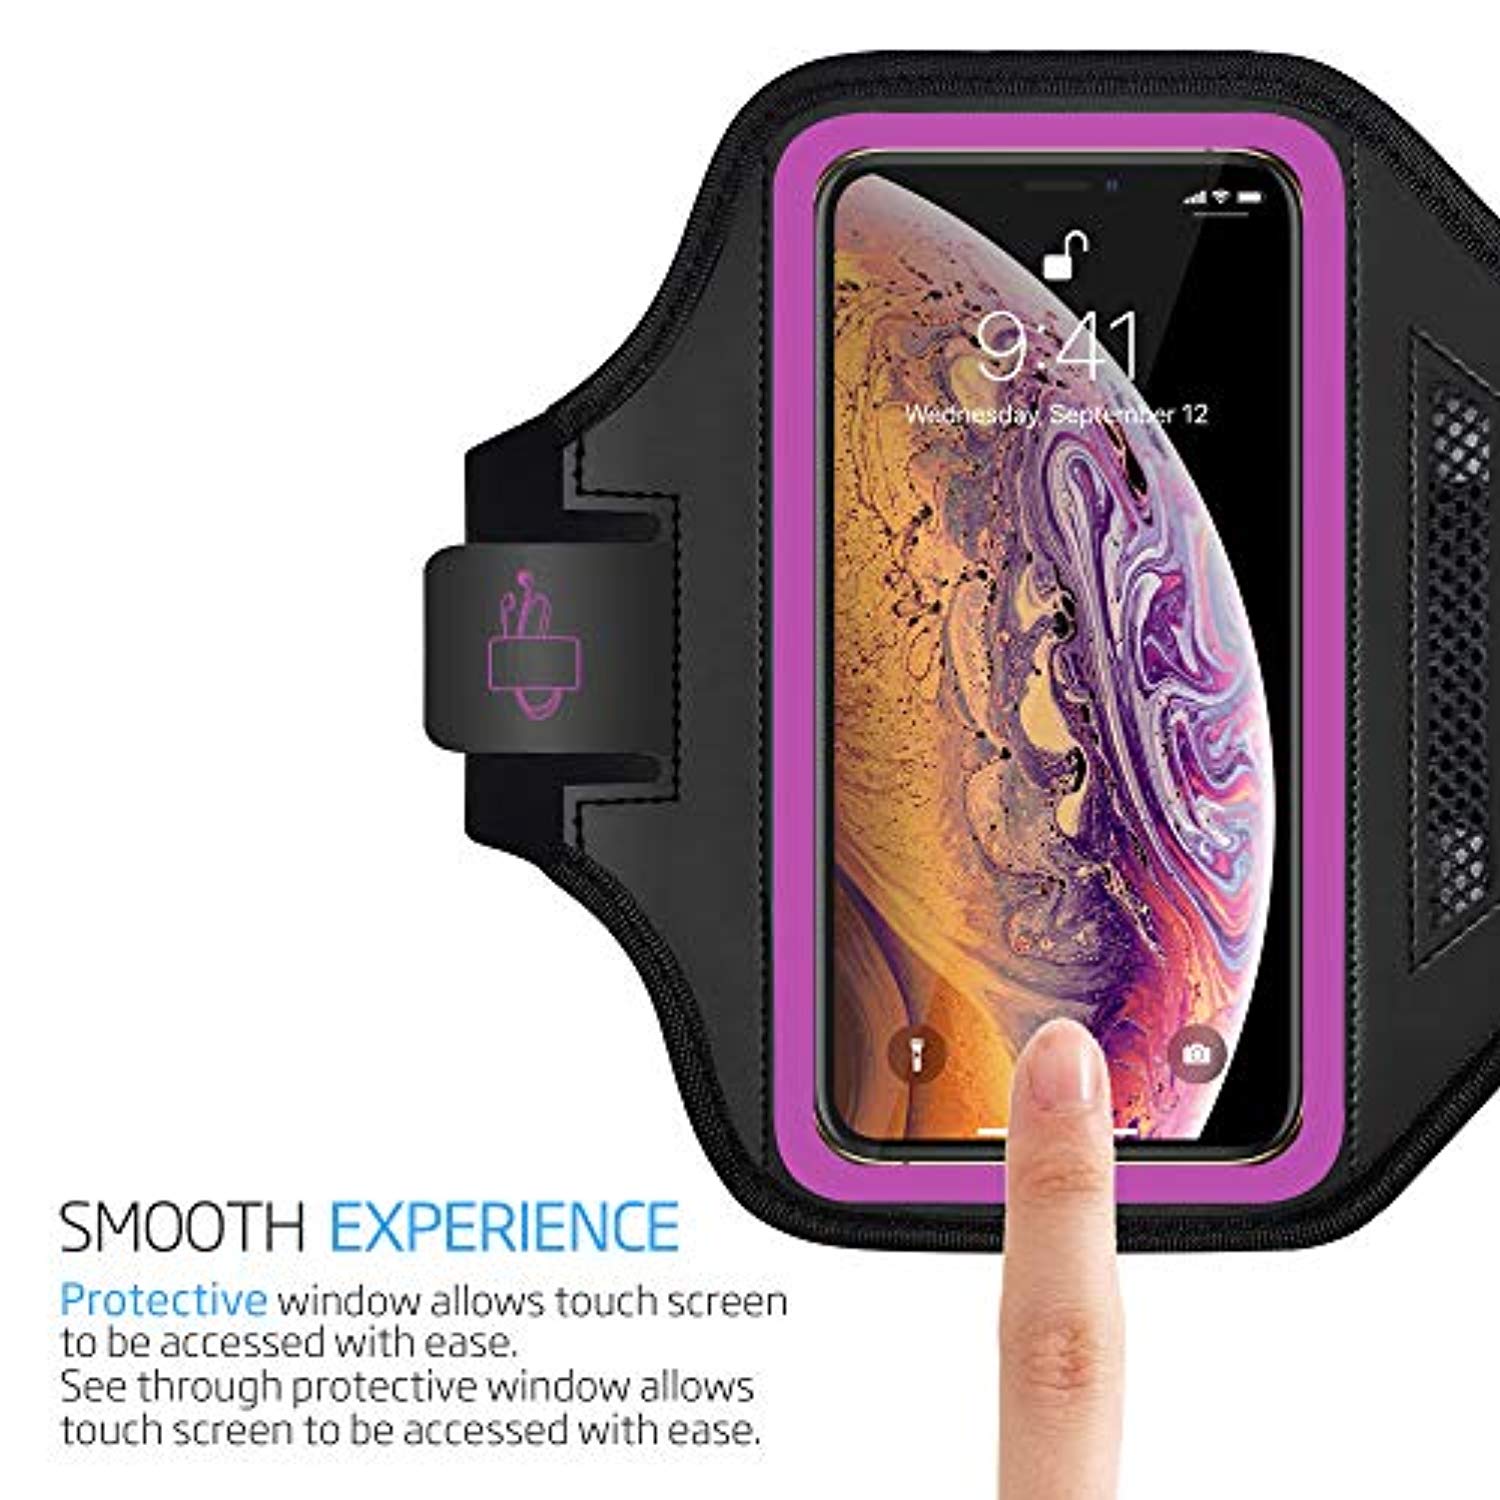 iPhone Xs Max Armband, Fingerprint Sensor Access Supported with Key Holder & Card Slot,Water Resistant and Sweat-Proof